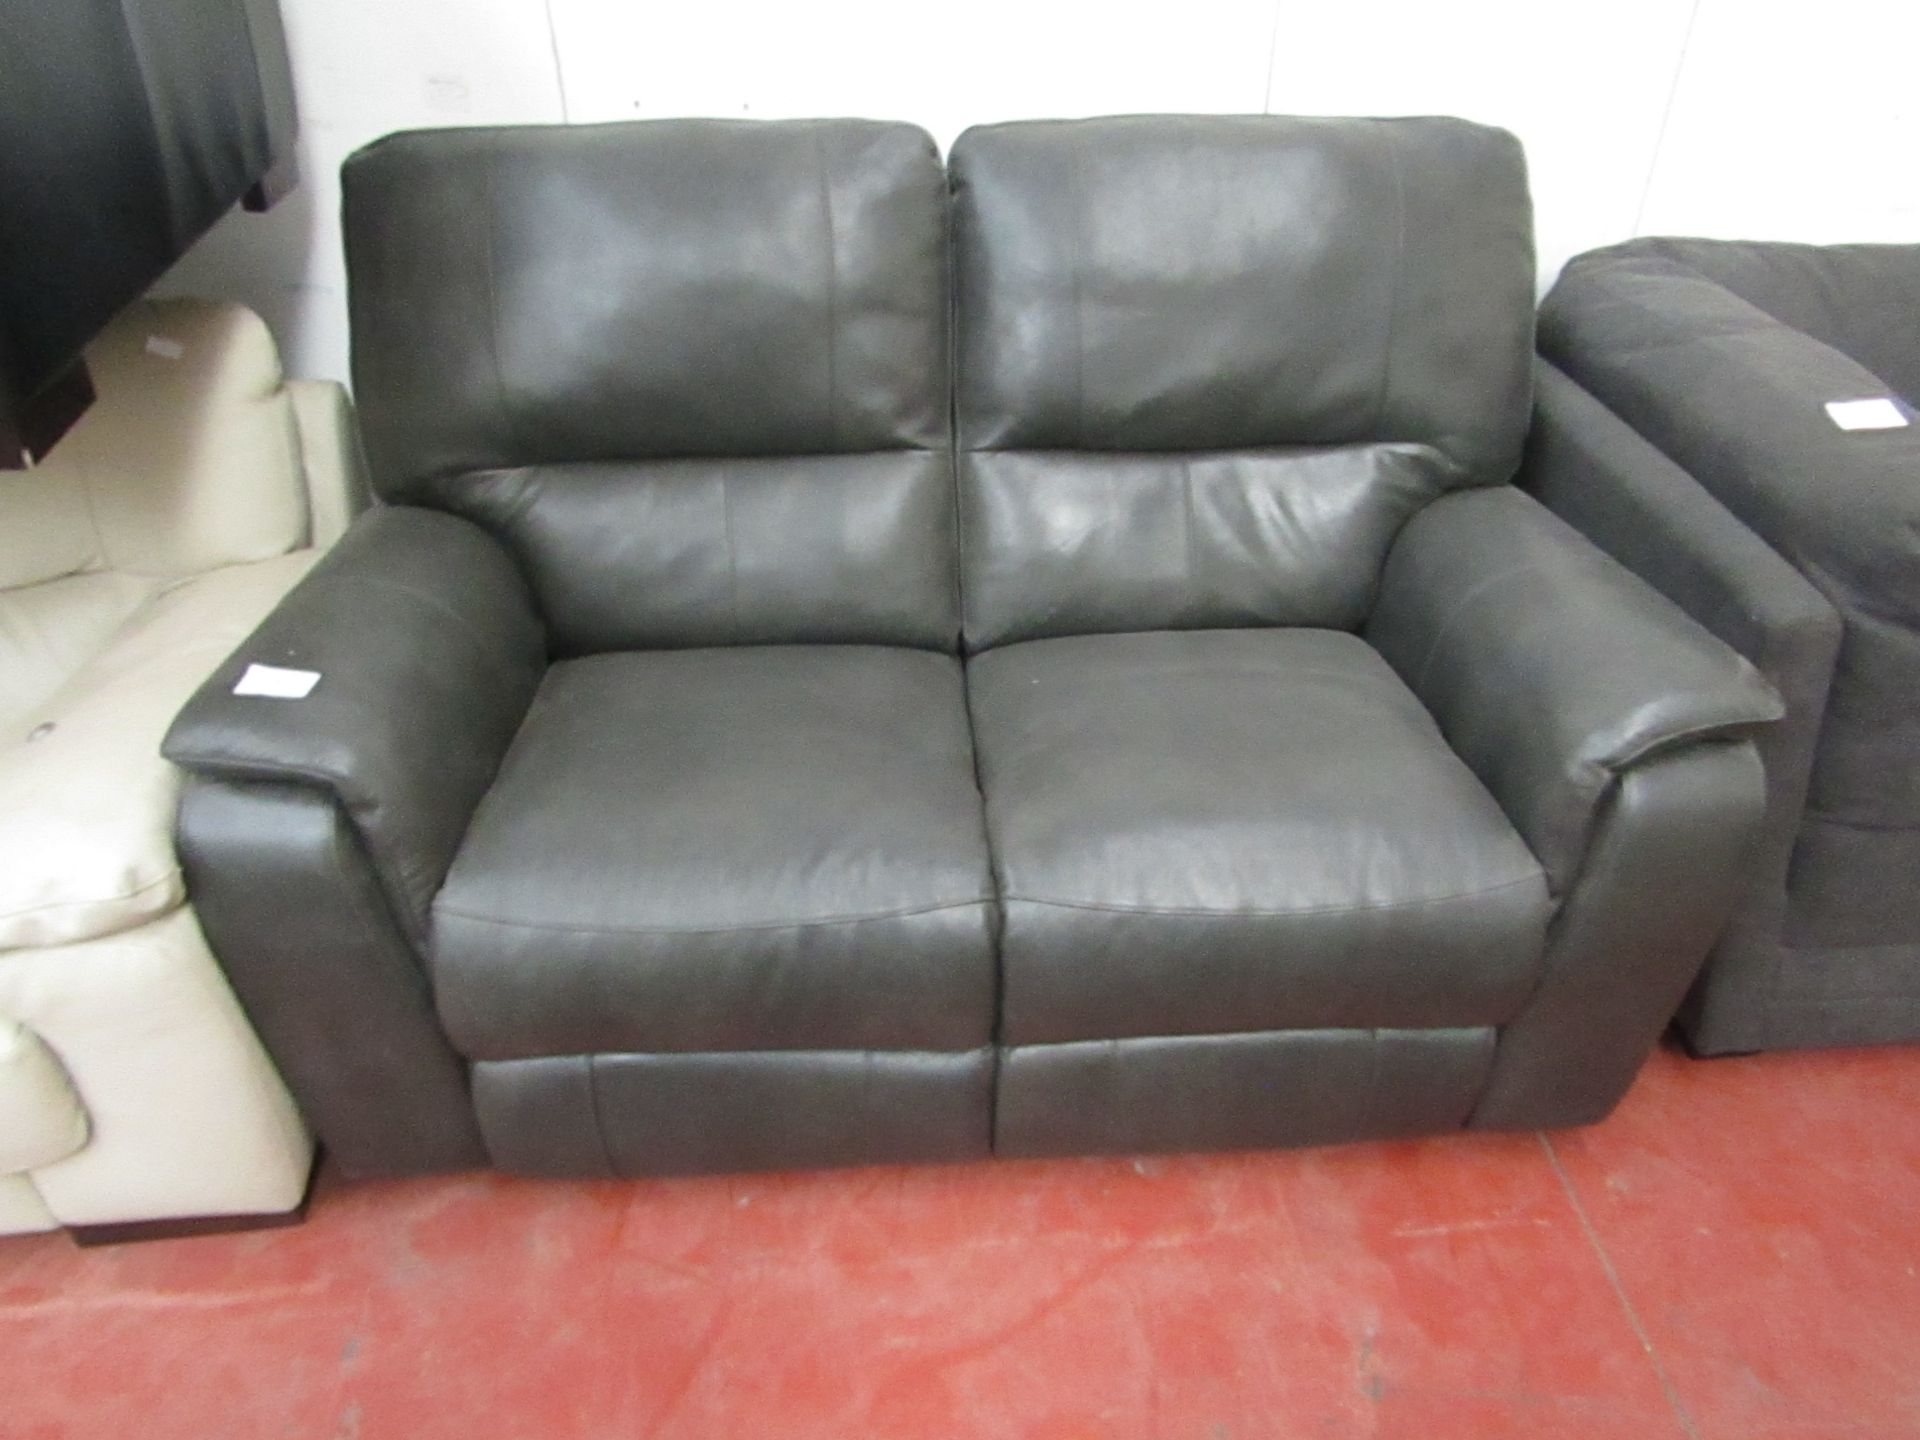 2 seater manual reclining sofa, tested working with no major damage.